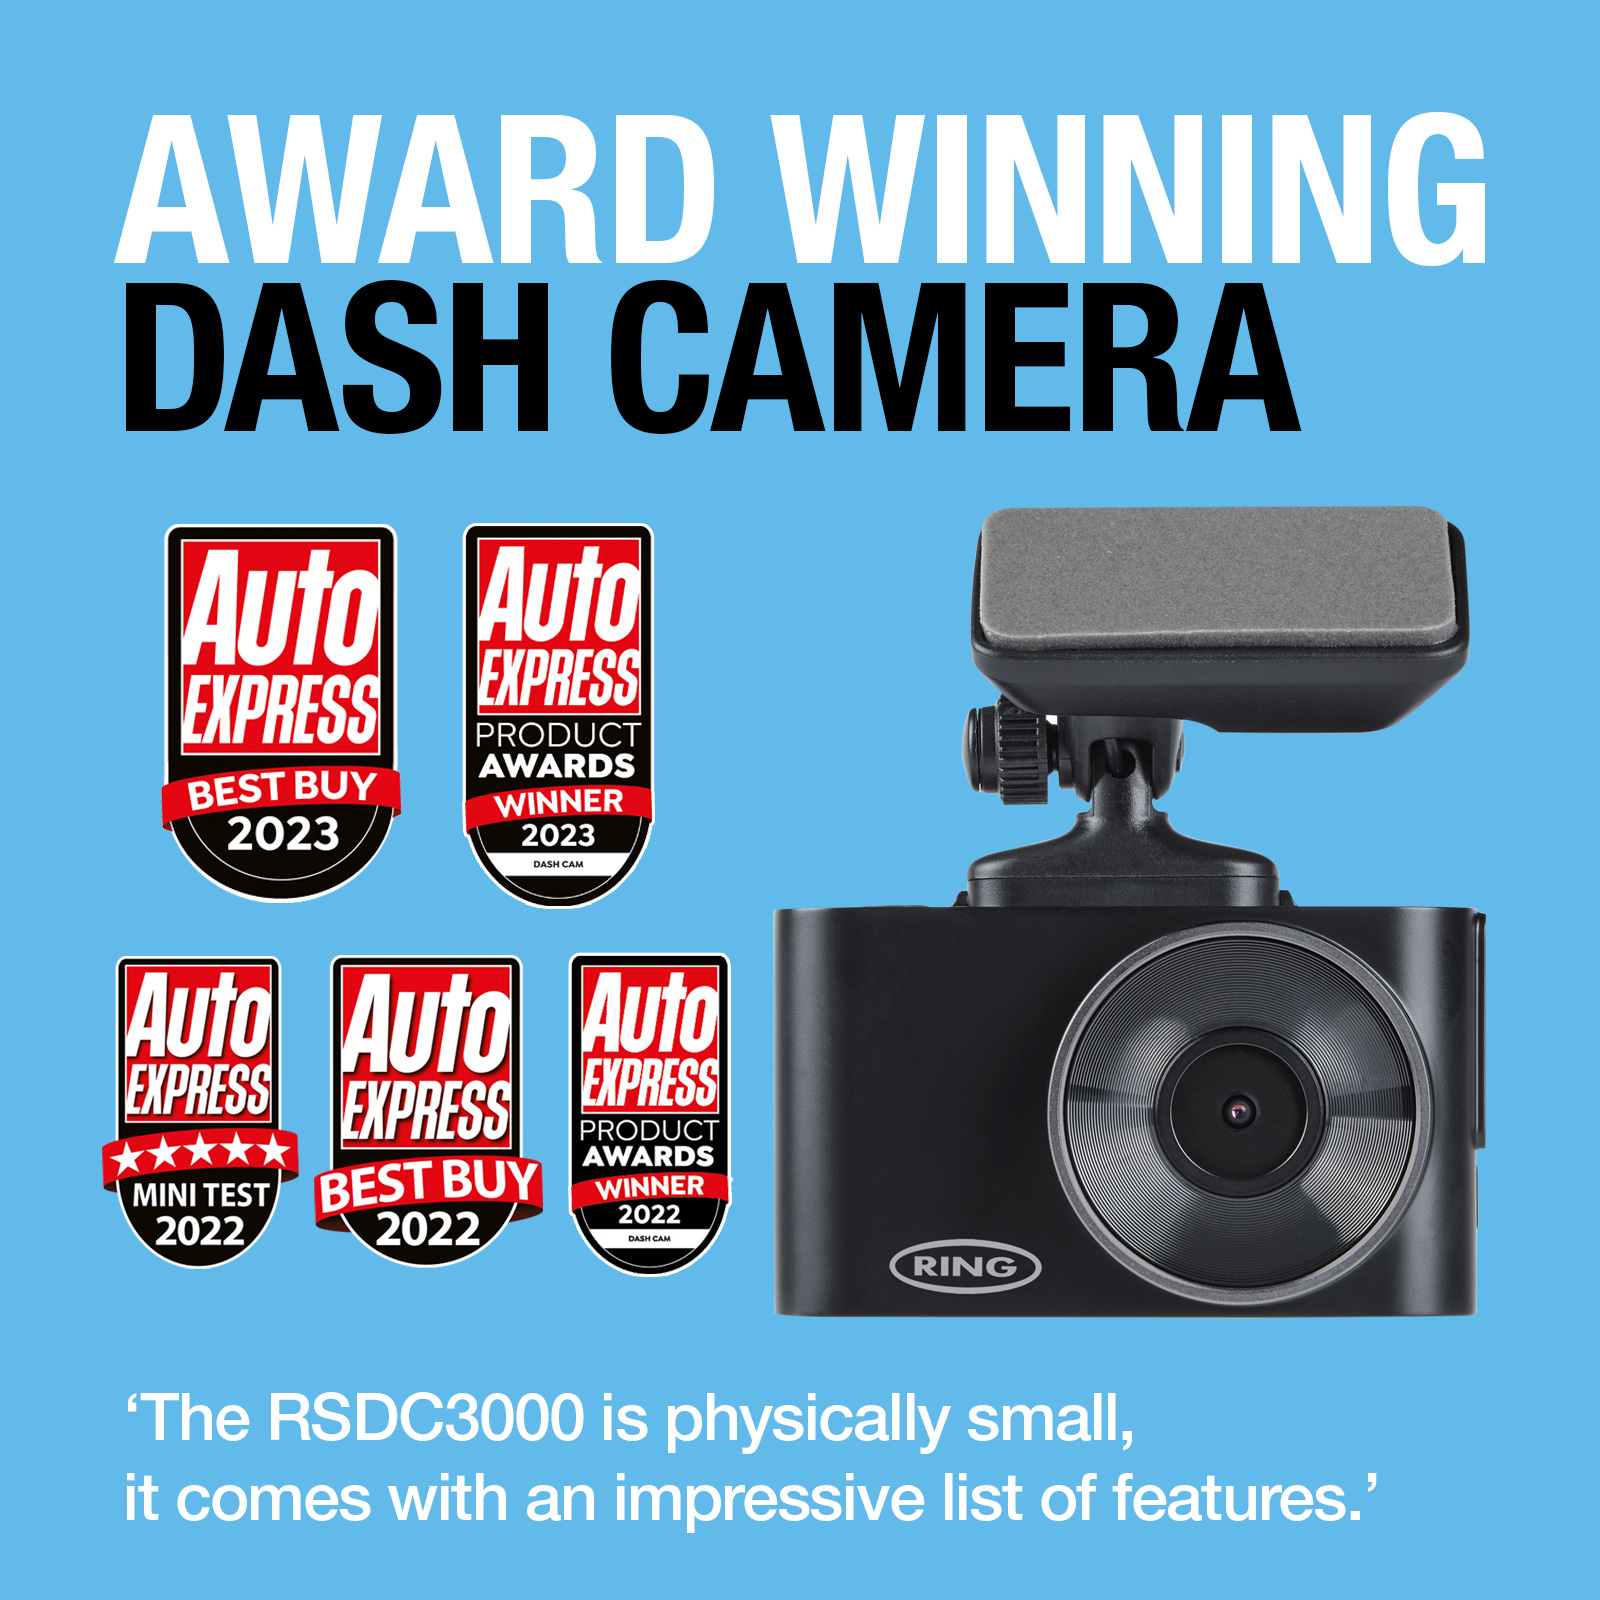 https://www.ringautomotive.com/files/myimages/product/Dash%20camera/RSDC3000/RSDC3000_ANNOTATION_UPDATED_003A.jpg